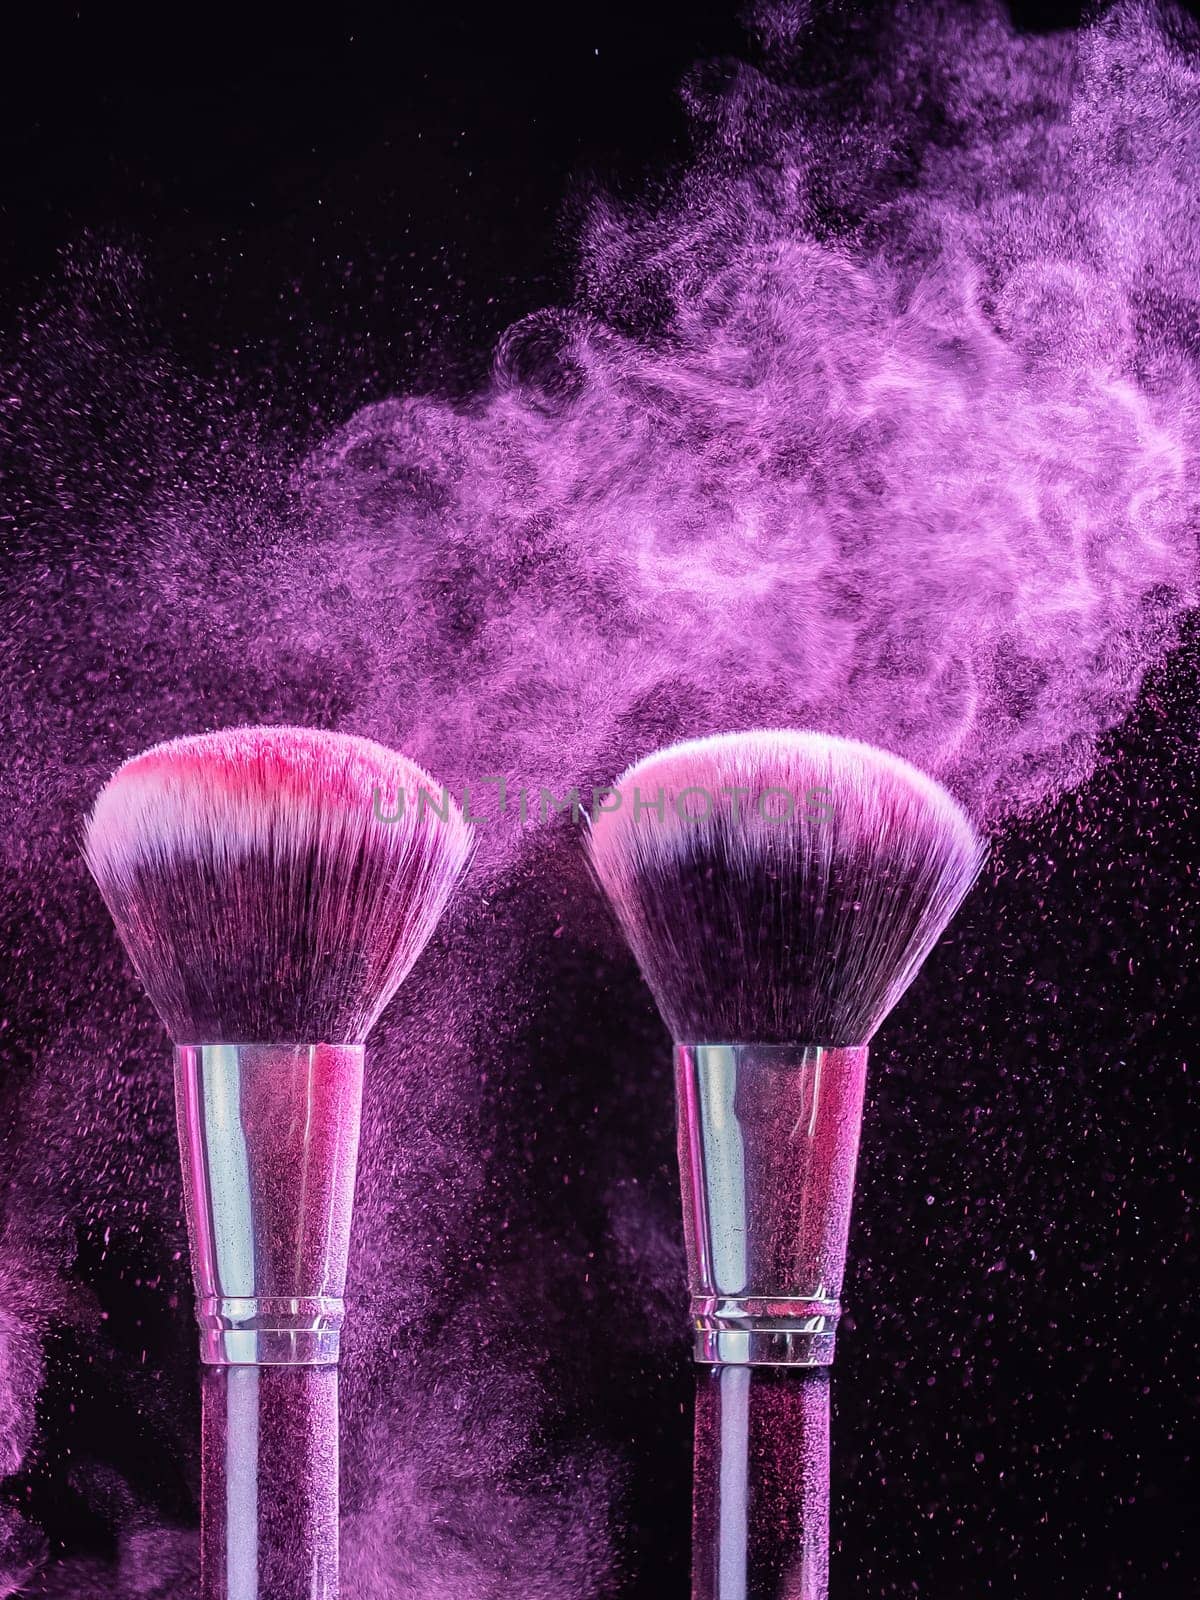 Cosmetics brush and explosion colorful makeup powder background - beauty make-up product and mineral cosmetic concept by Satura86